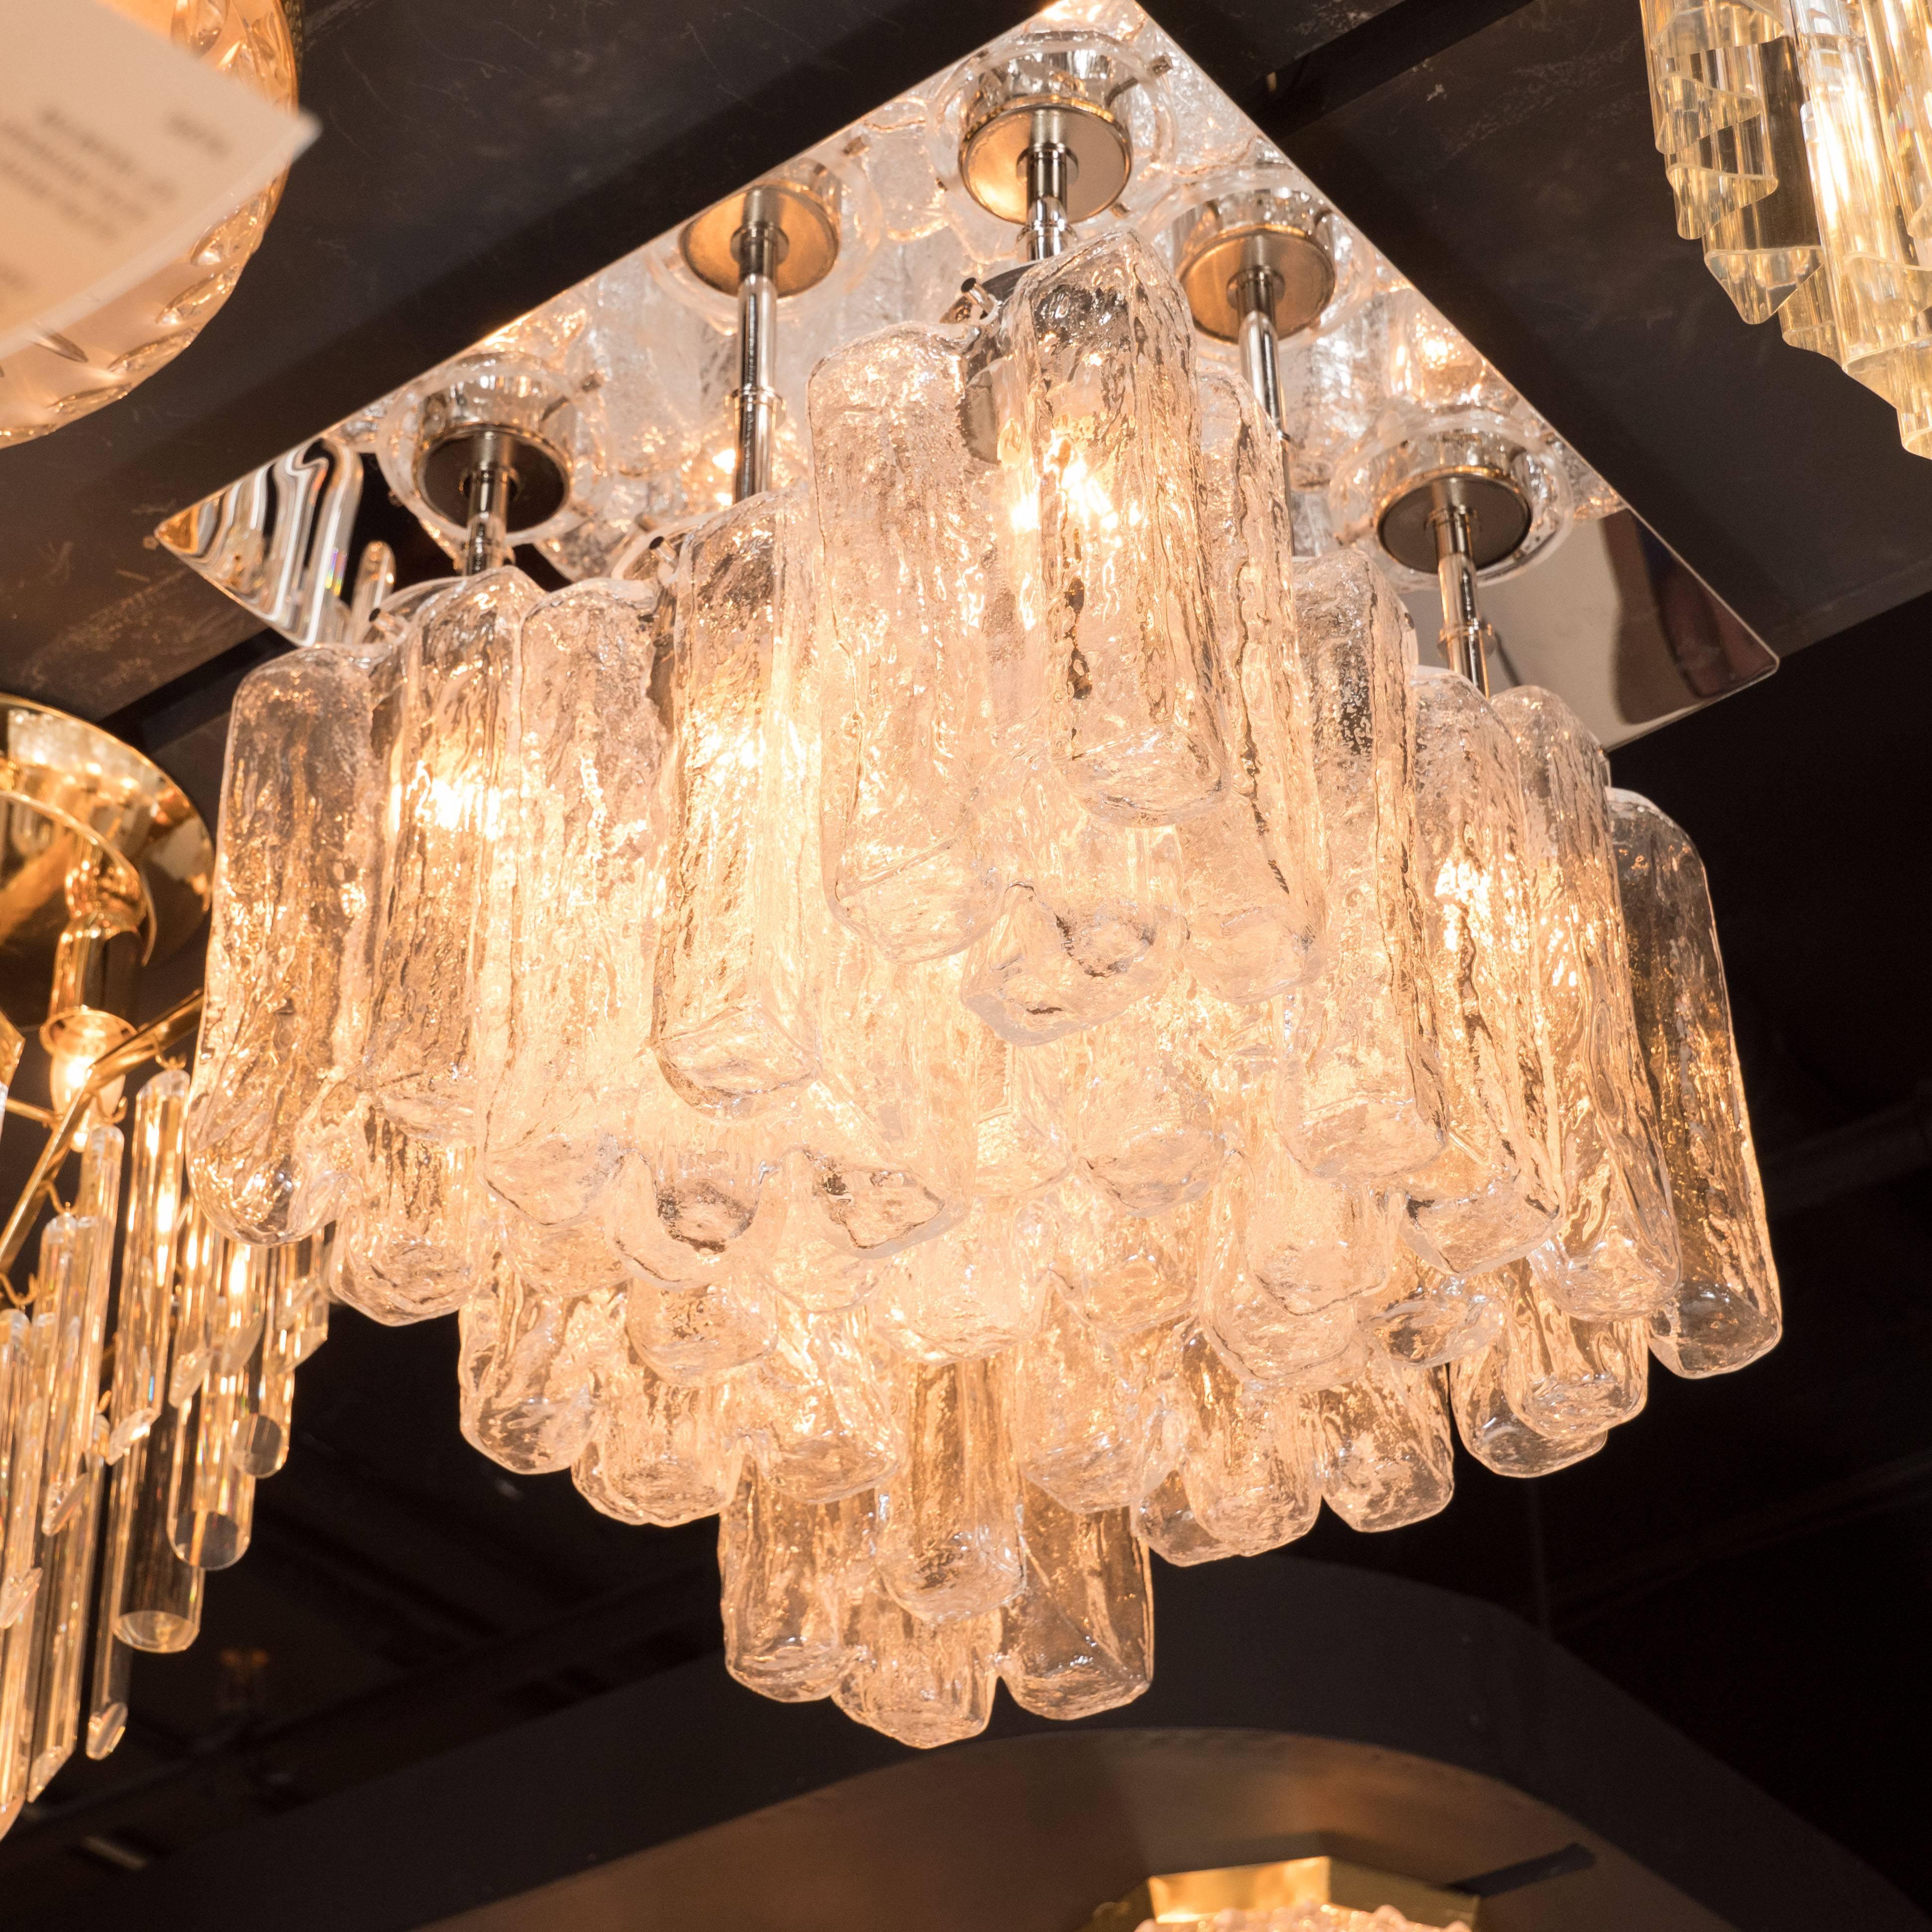 This sophisticated chandelier marries old world craftsmanship with contemporary design to a stunning effect. It features nine block form shades, consisting of a wealth of conjoined organic rectangular forms offering a subtle translucence. Crafted in